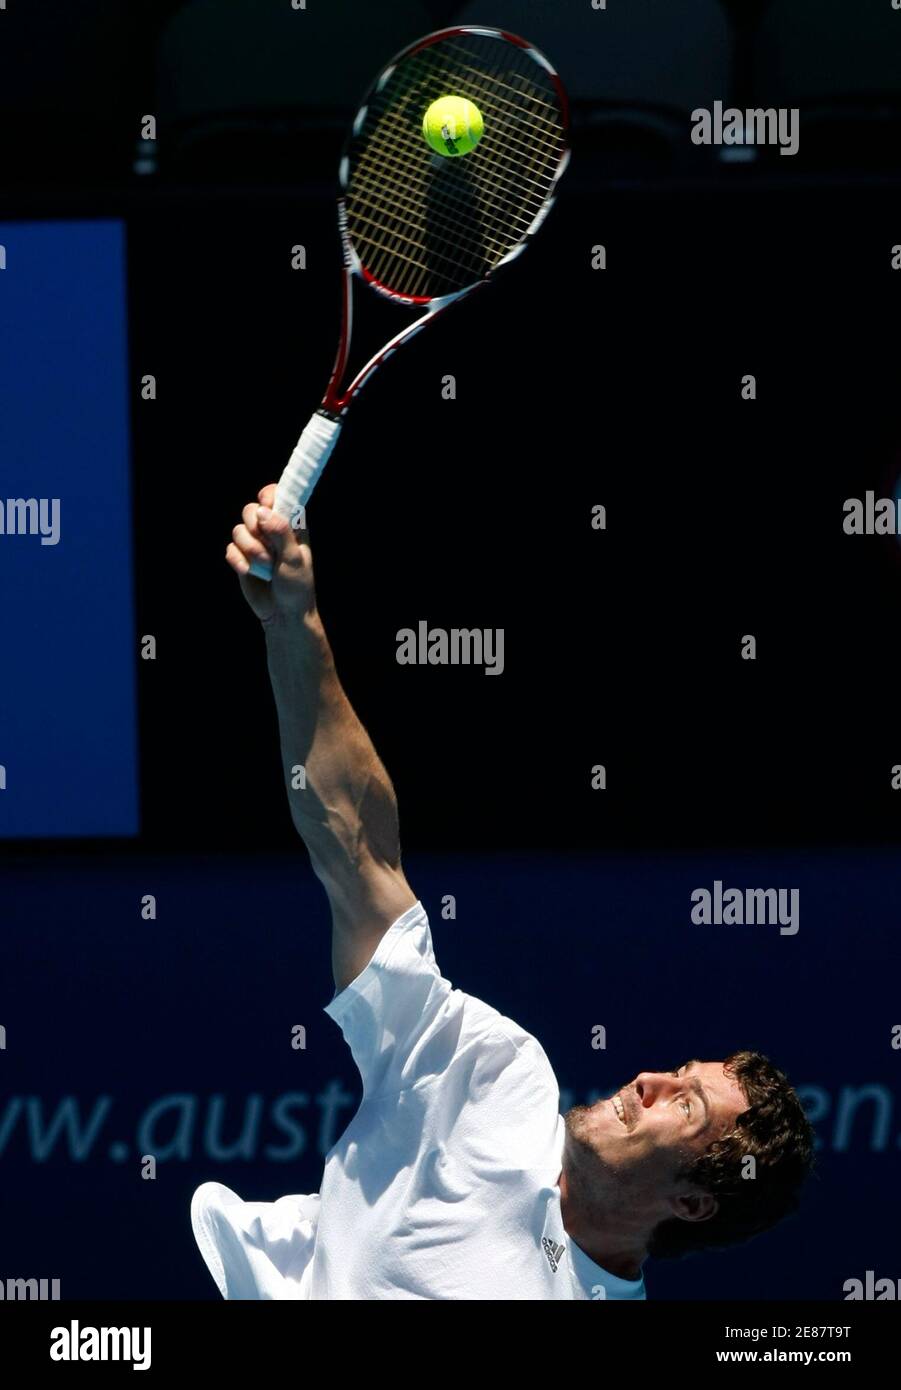 Russia's Marat Safin serves the ball at a tennis practice session at  Melbourne Park January 12, 2009. REUTERS/Mick Tsikas (AUSTRALIA Stock Photo  - Alamy